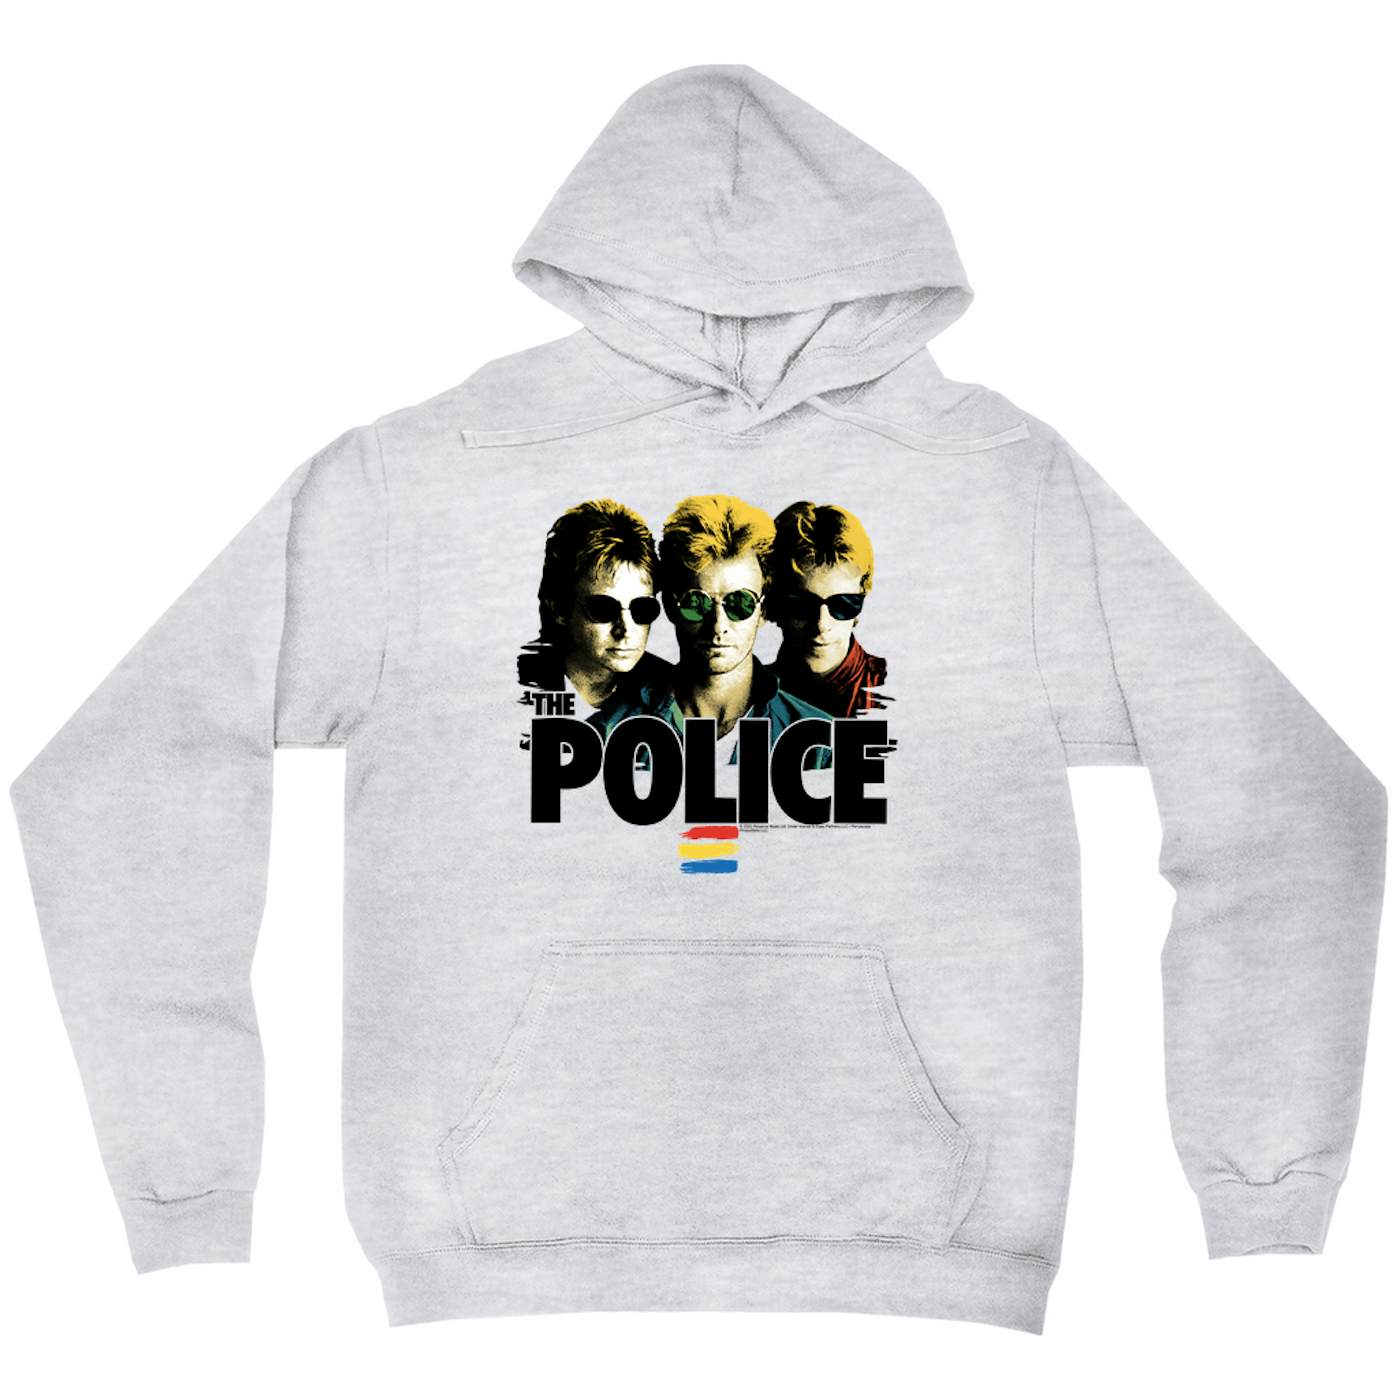 The Police Hoodie | Synchronicity Shades Image (Merchbar Exclusive) The Police Hoodie